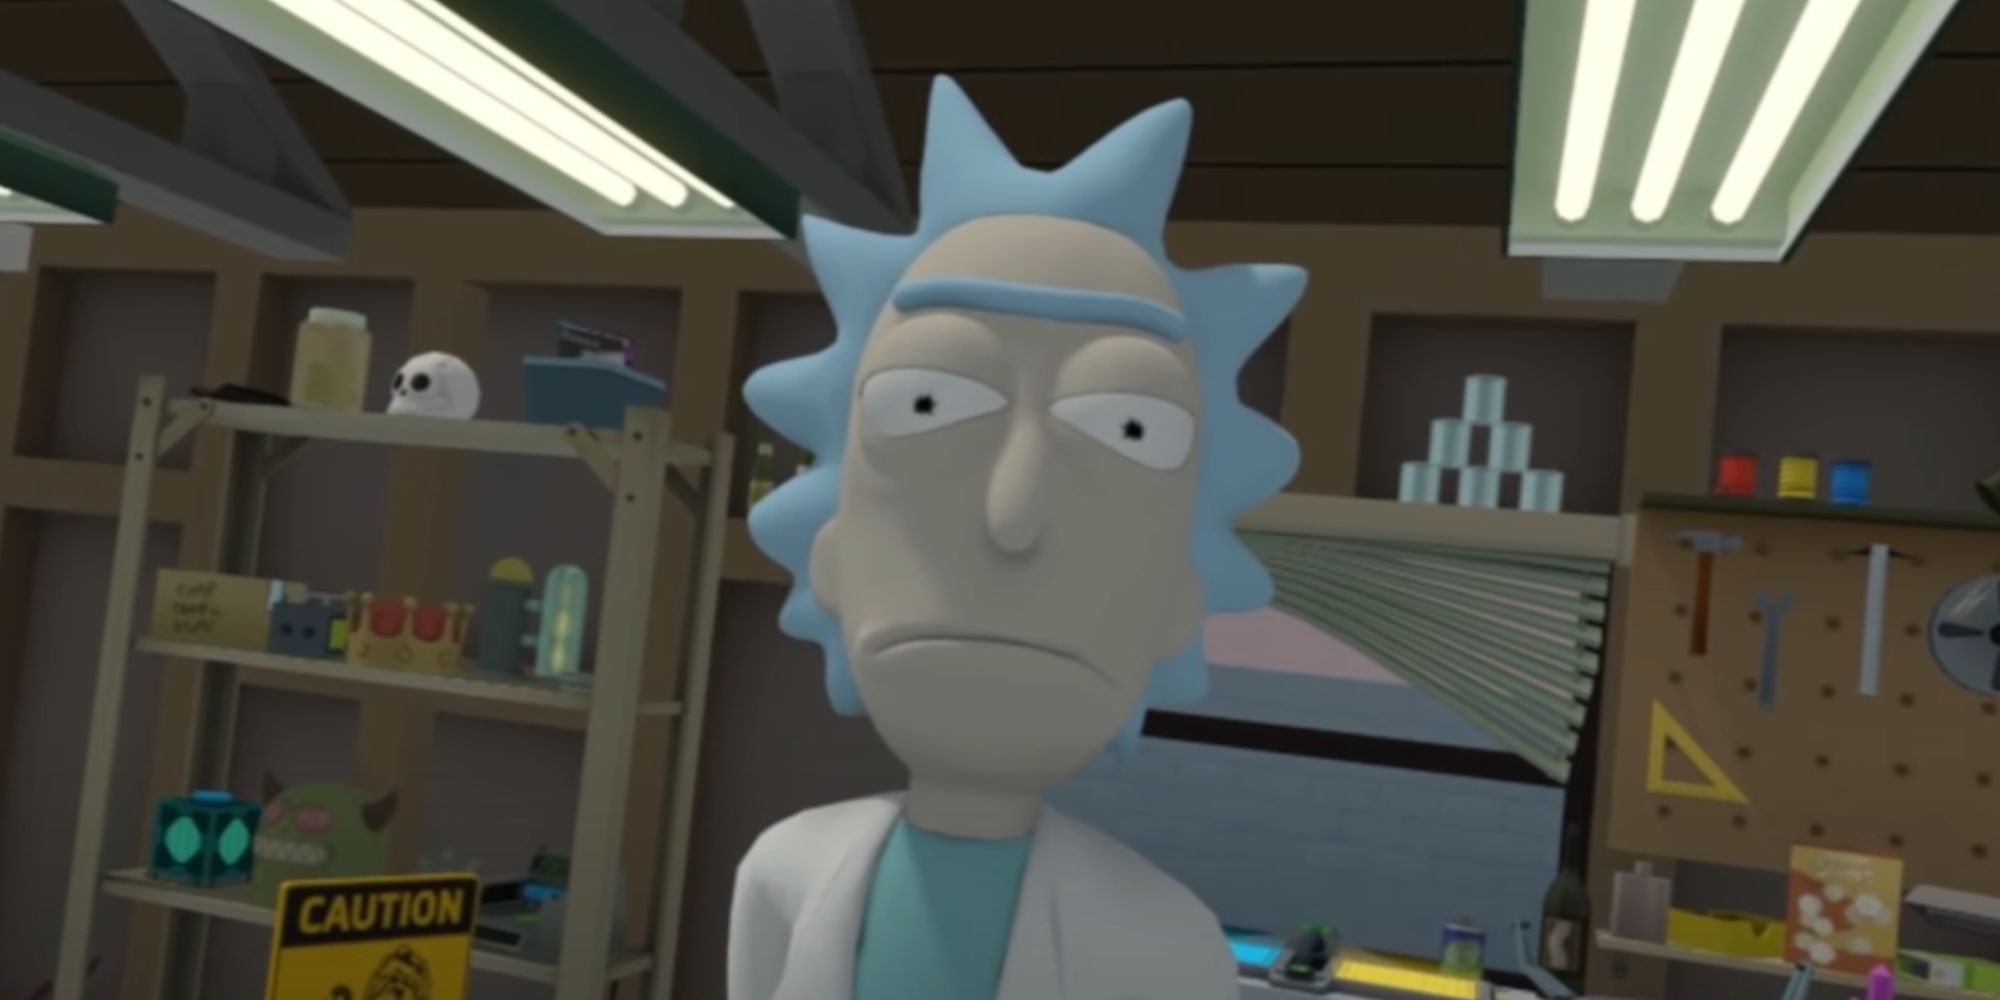 Rick In Virtual Reality in the VR game Virtual Rick-Ality